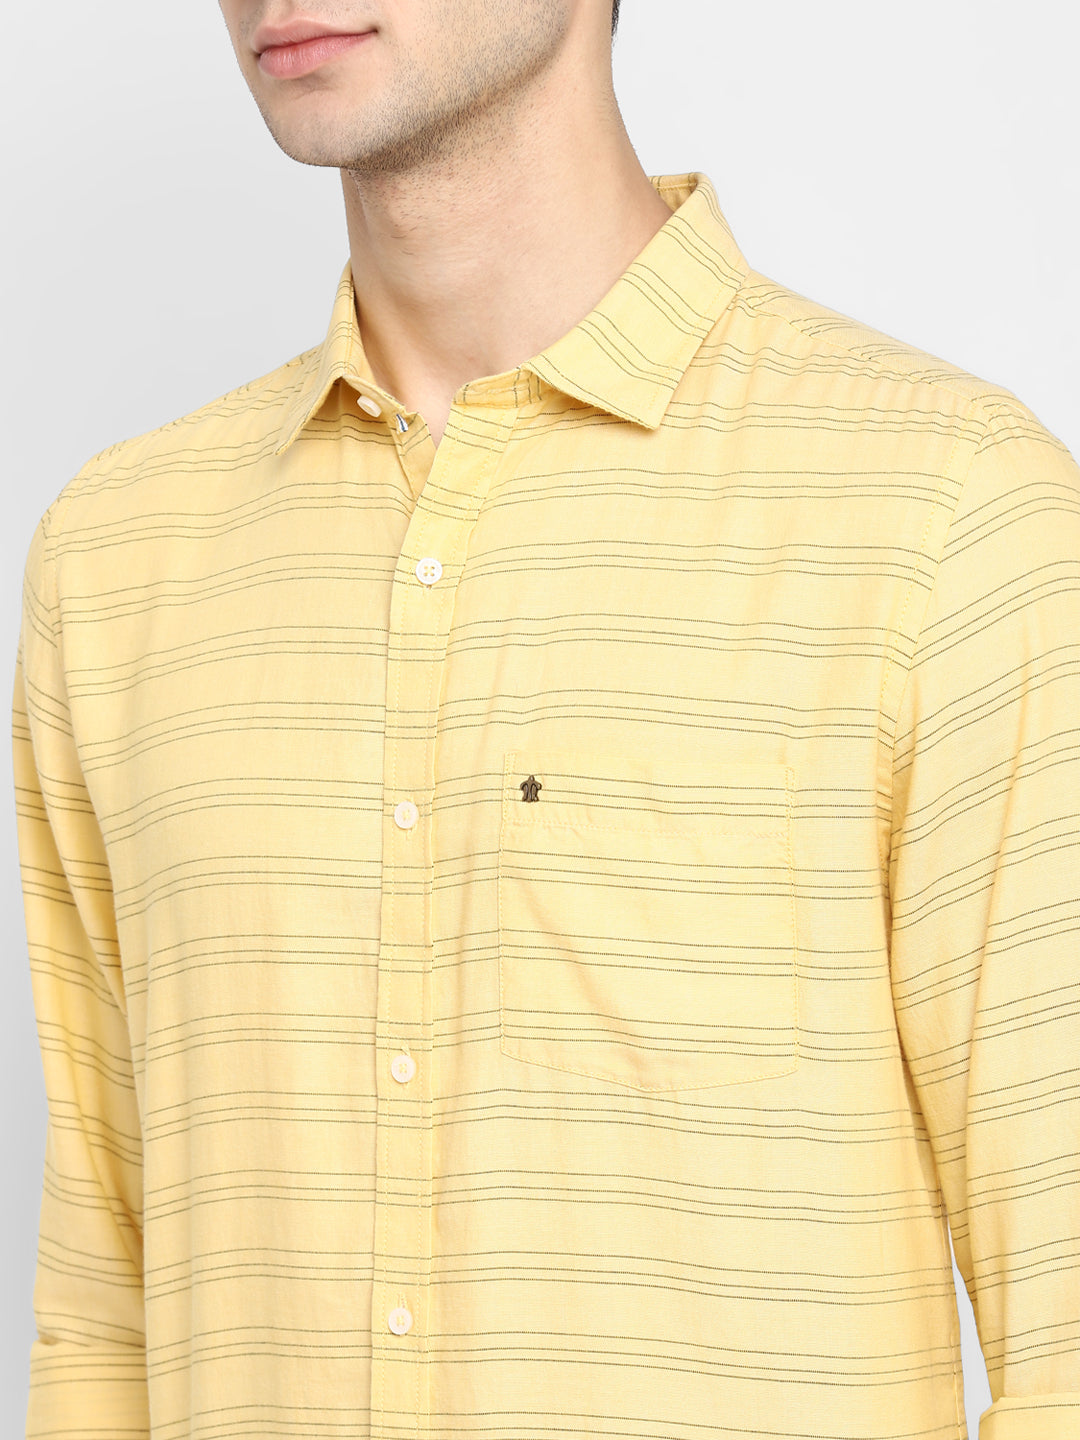 Stiped Yellow Slim Fit Casual Shirt For Men